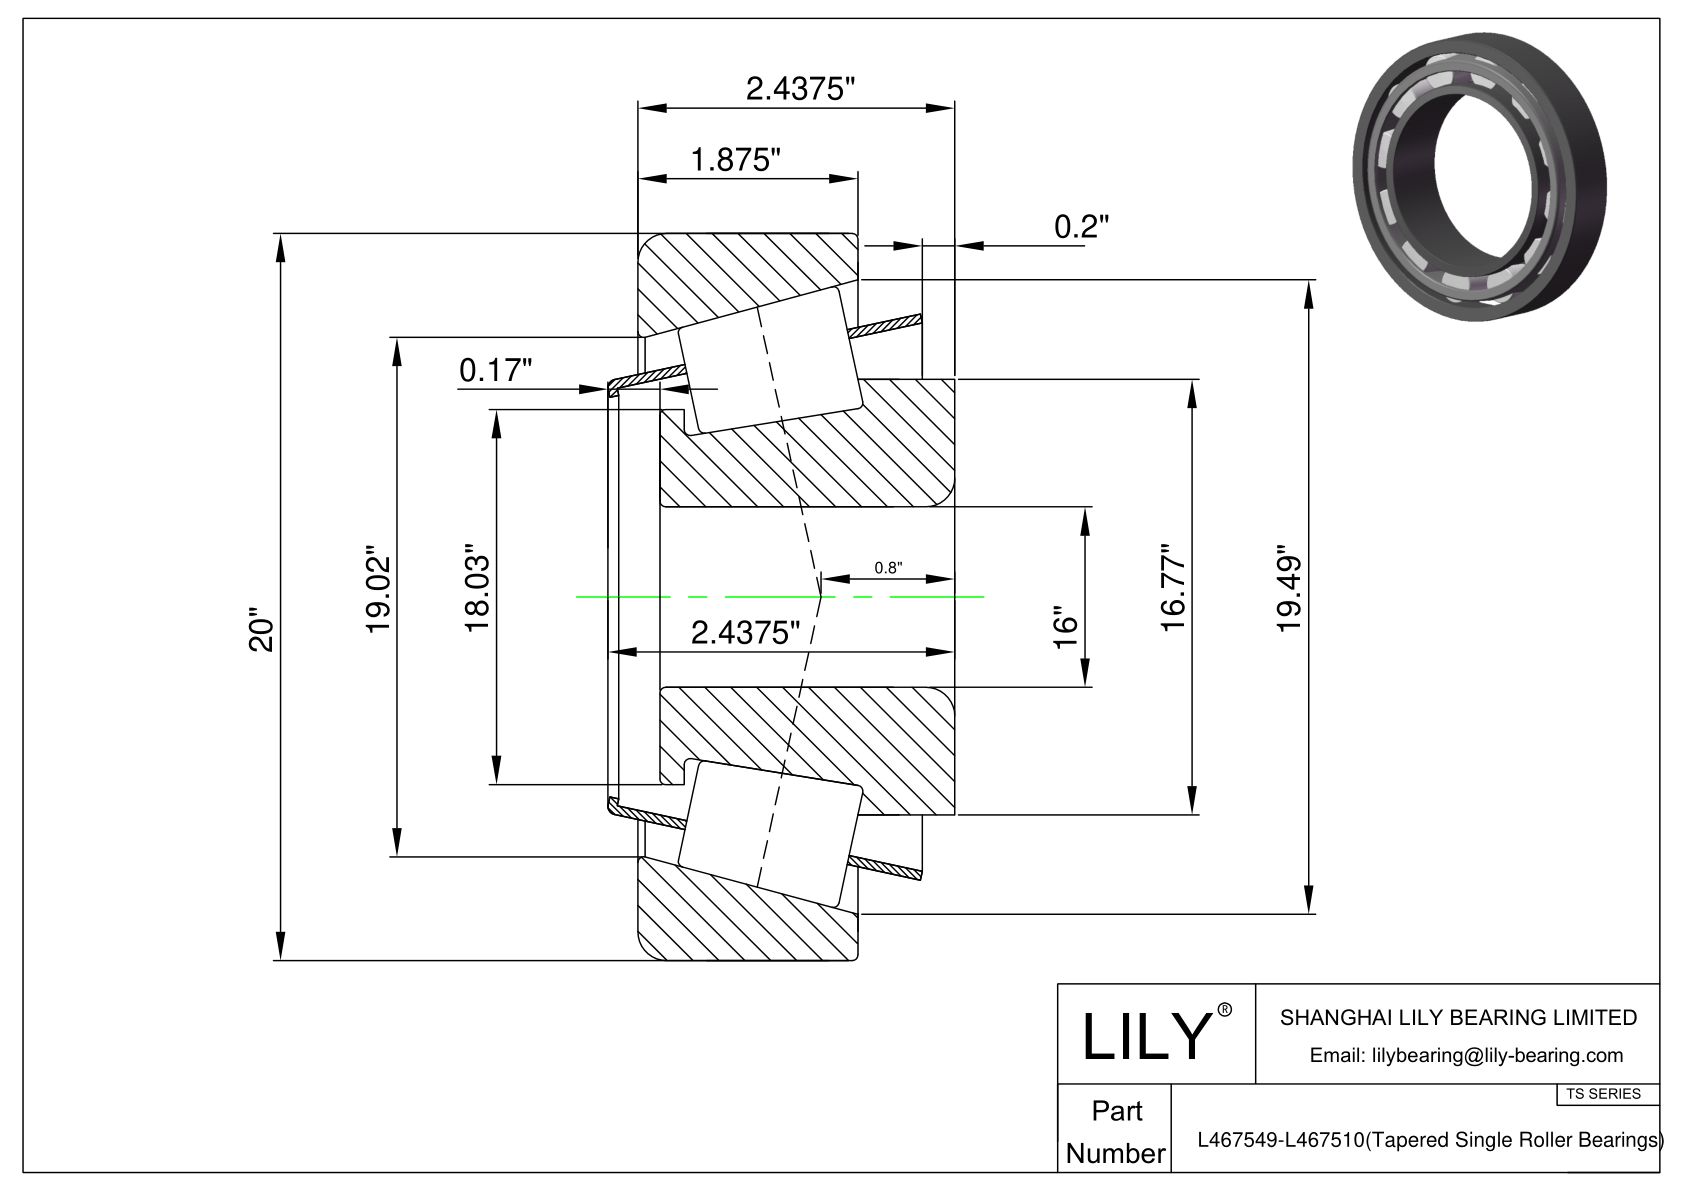 L467549-L467510 TS (Tapered Single Roller Bearings) (Imperial) cad drawing